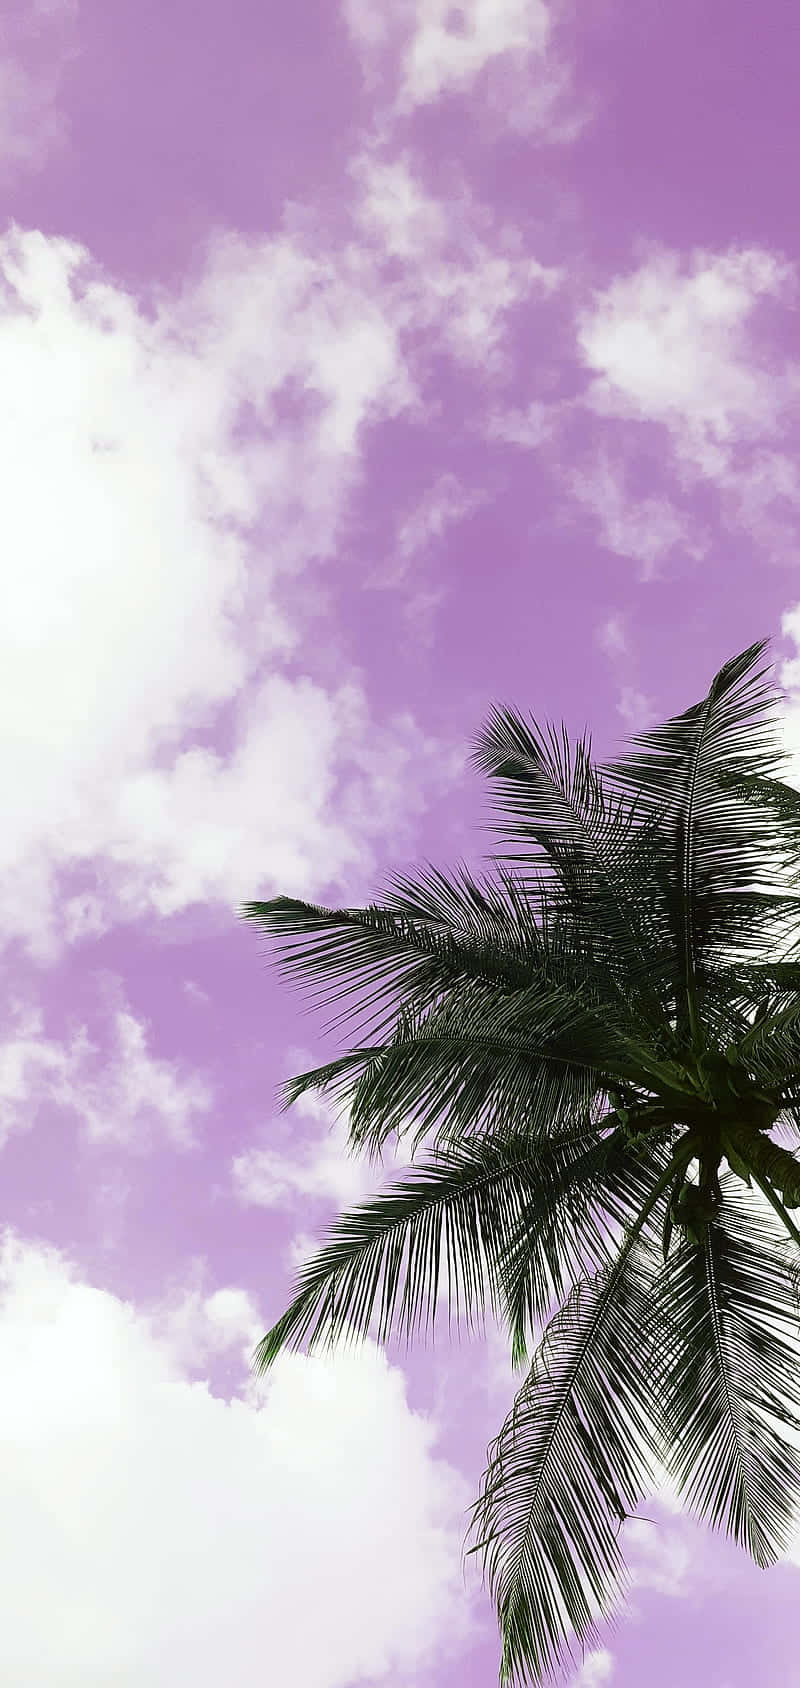 A Palm Tree Is In The Sky With Clouds